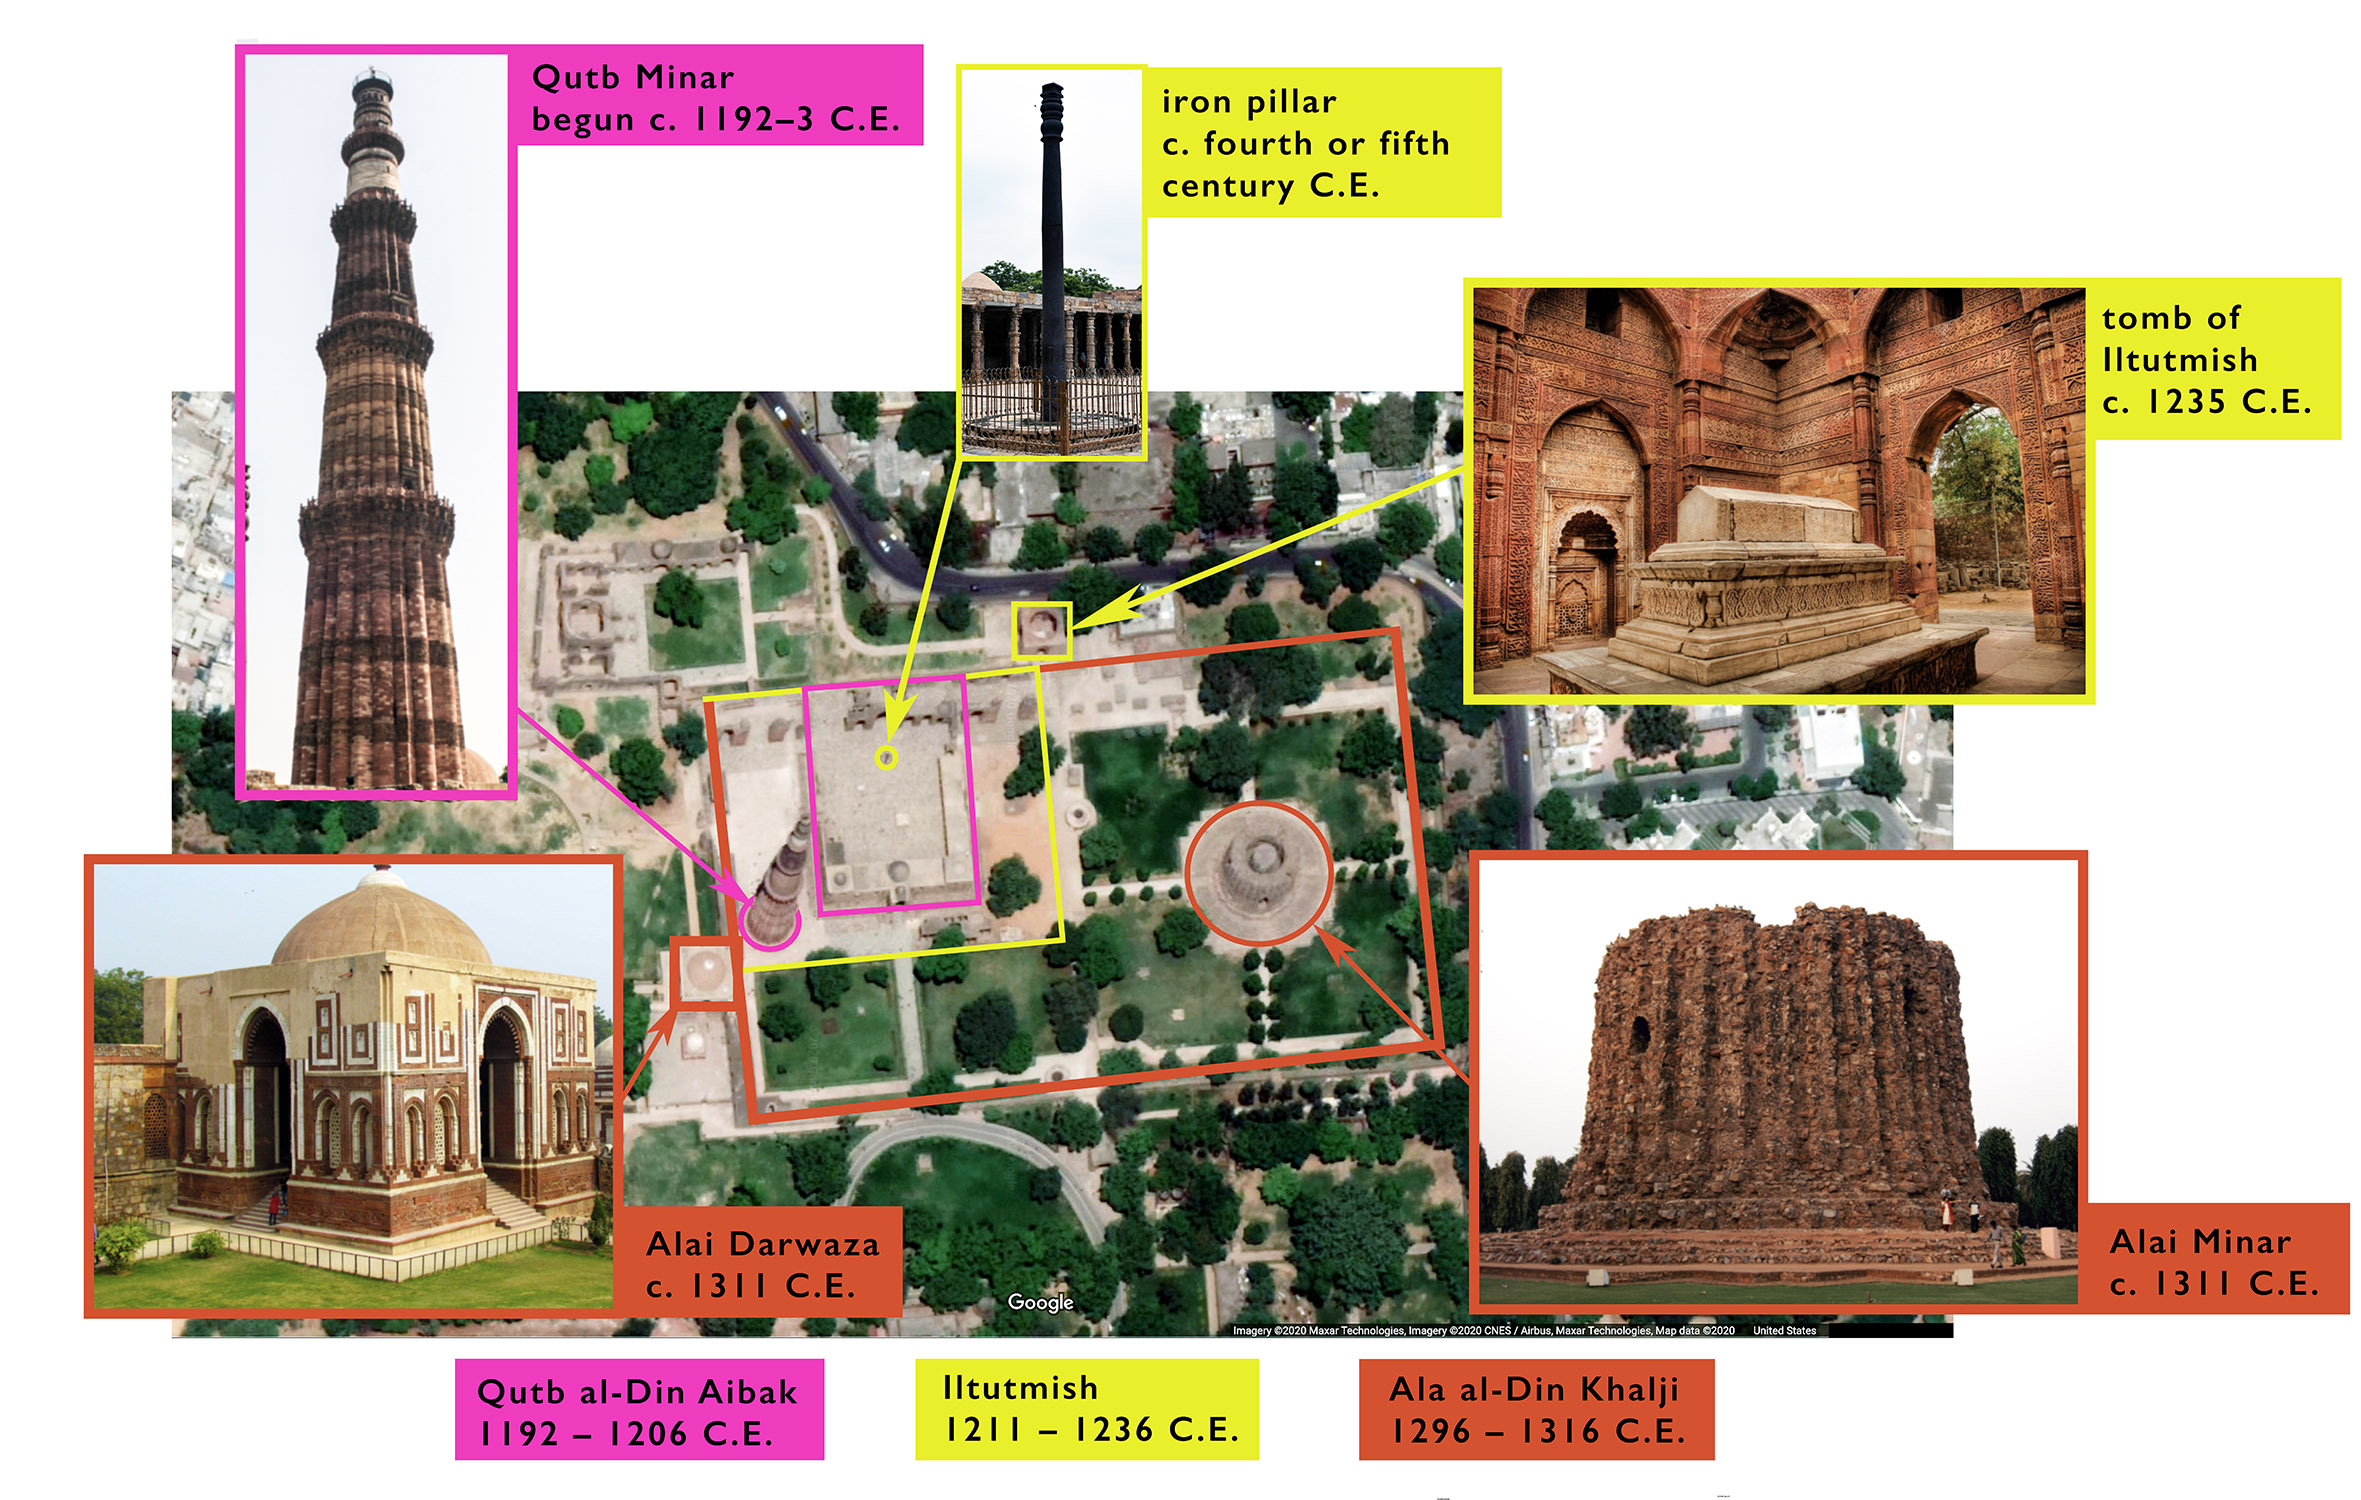 Plan of the Qutb complex showing the phases of construction of select monuments (photos: clockwise from top, Indrajit Das, CC BY-SA 4.0; Bikashrd, CC BY-SA 4.0; Kavaiyan, CC BY-SA 2.0; Alimallick, CC BY-SA 3.0)